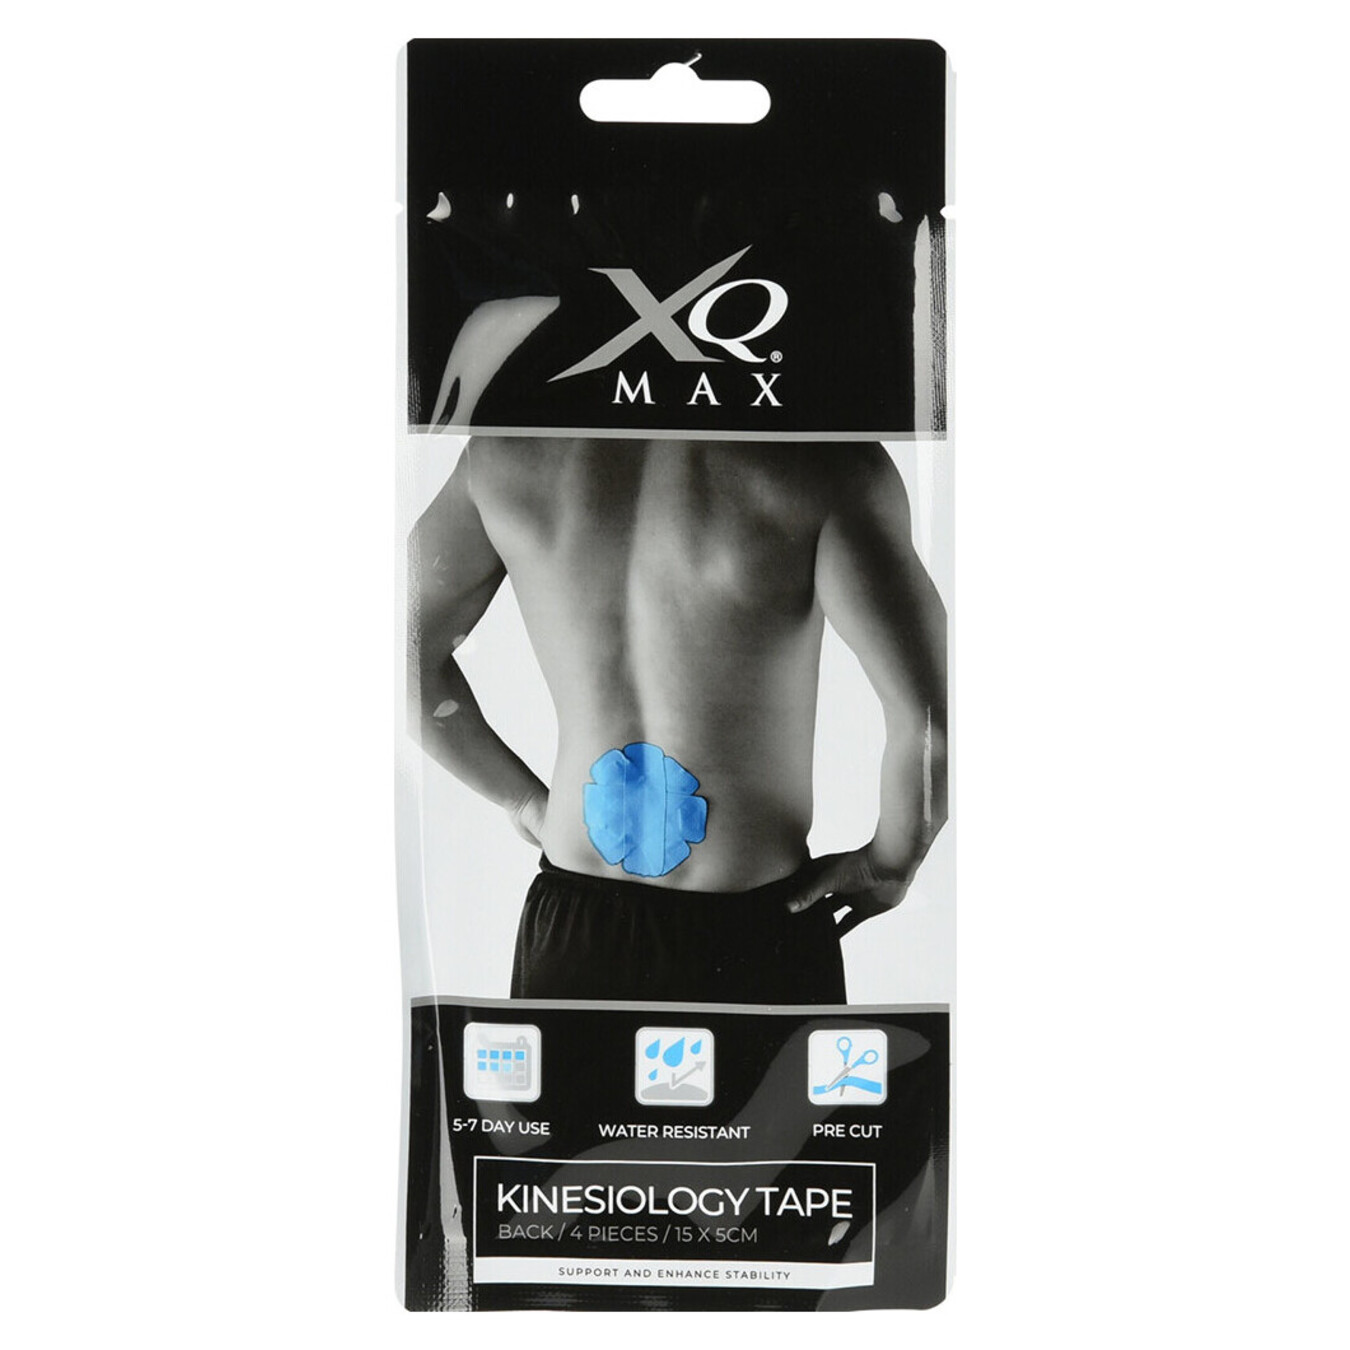 A set of Koopman kinesiology tapes for the back 15*5 cm